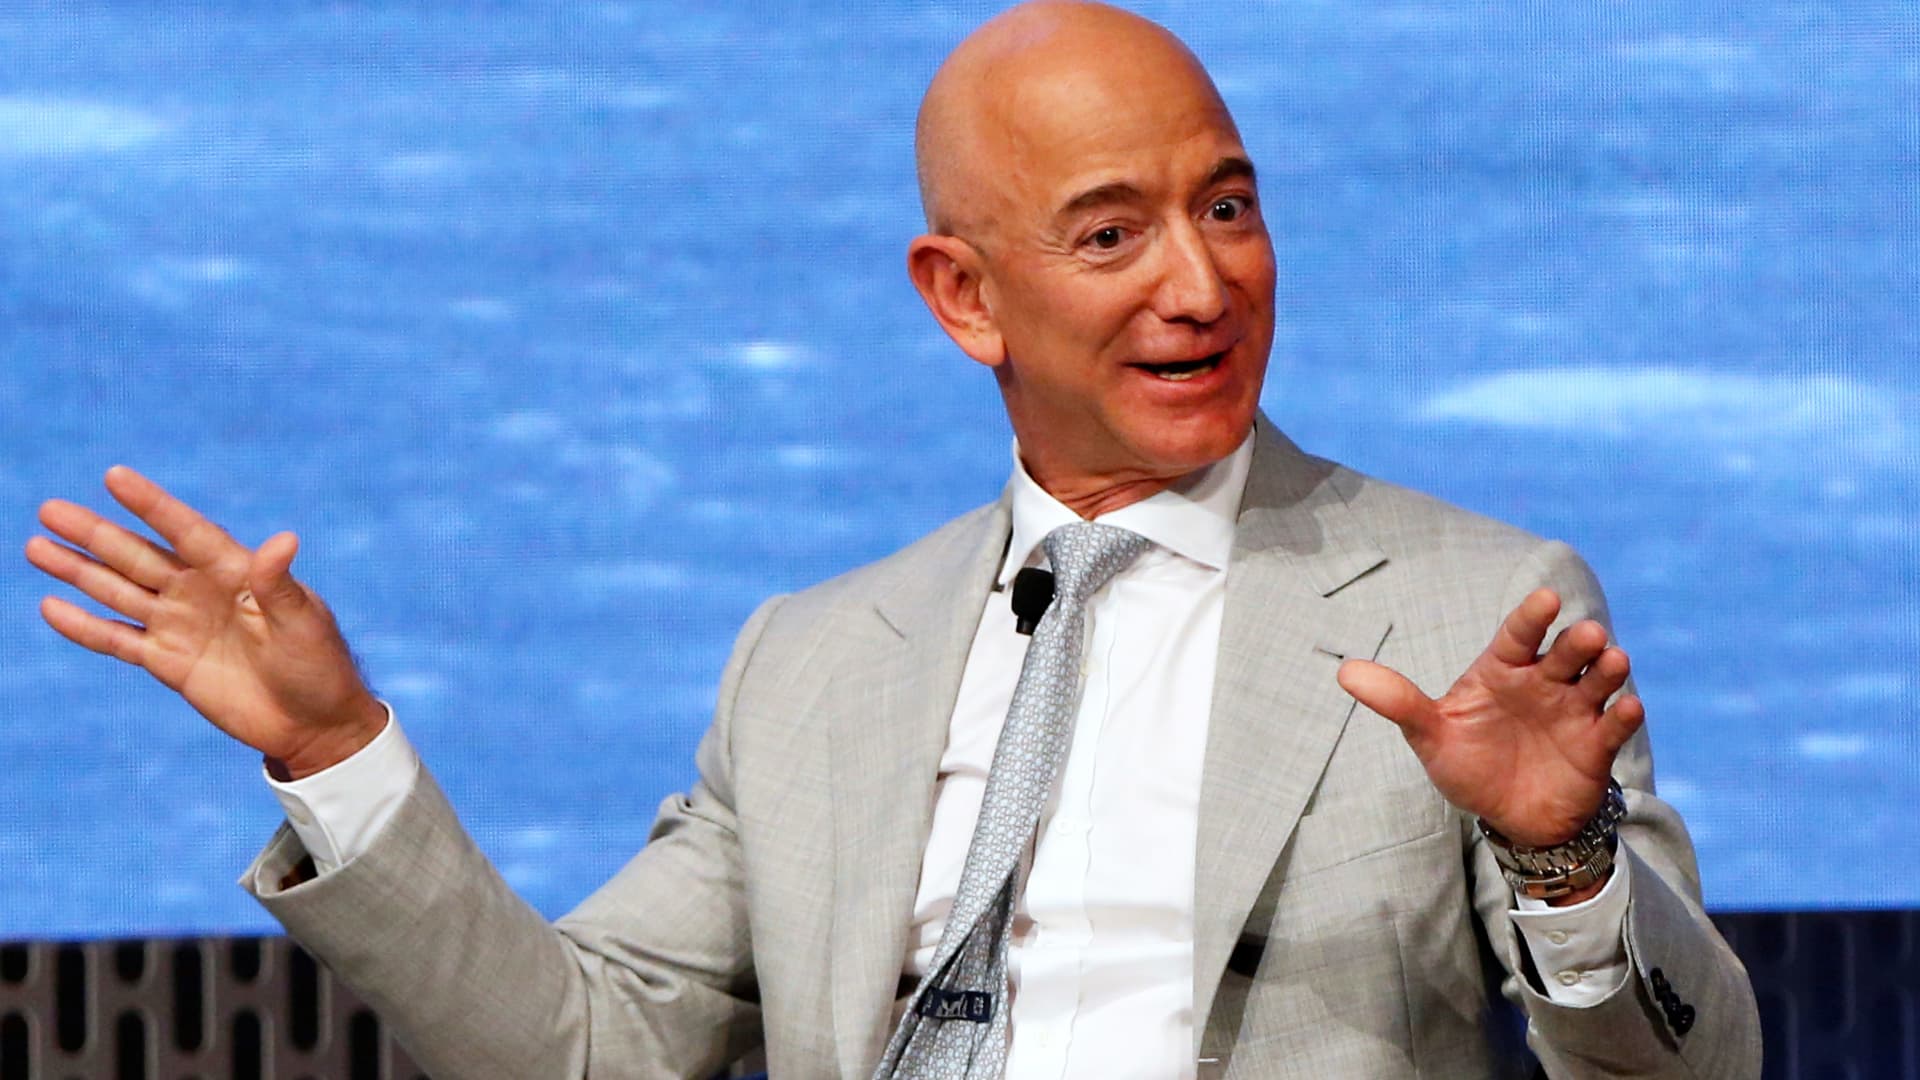 Jeff Bezos: 'I believe in wandering' to boost productivity - CNBC